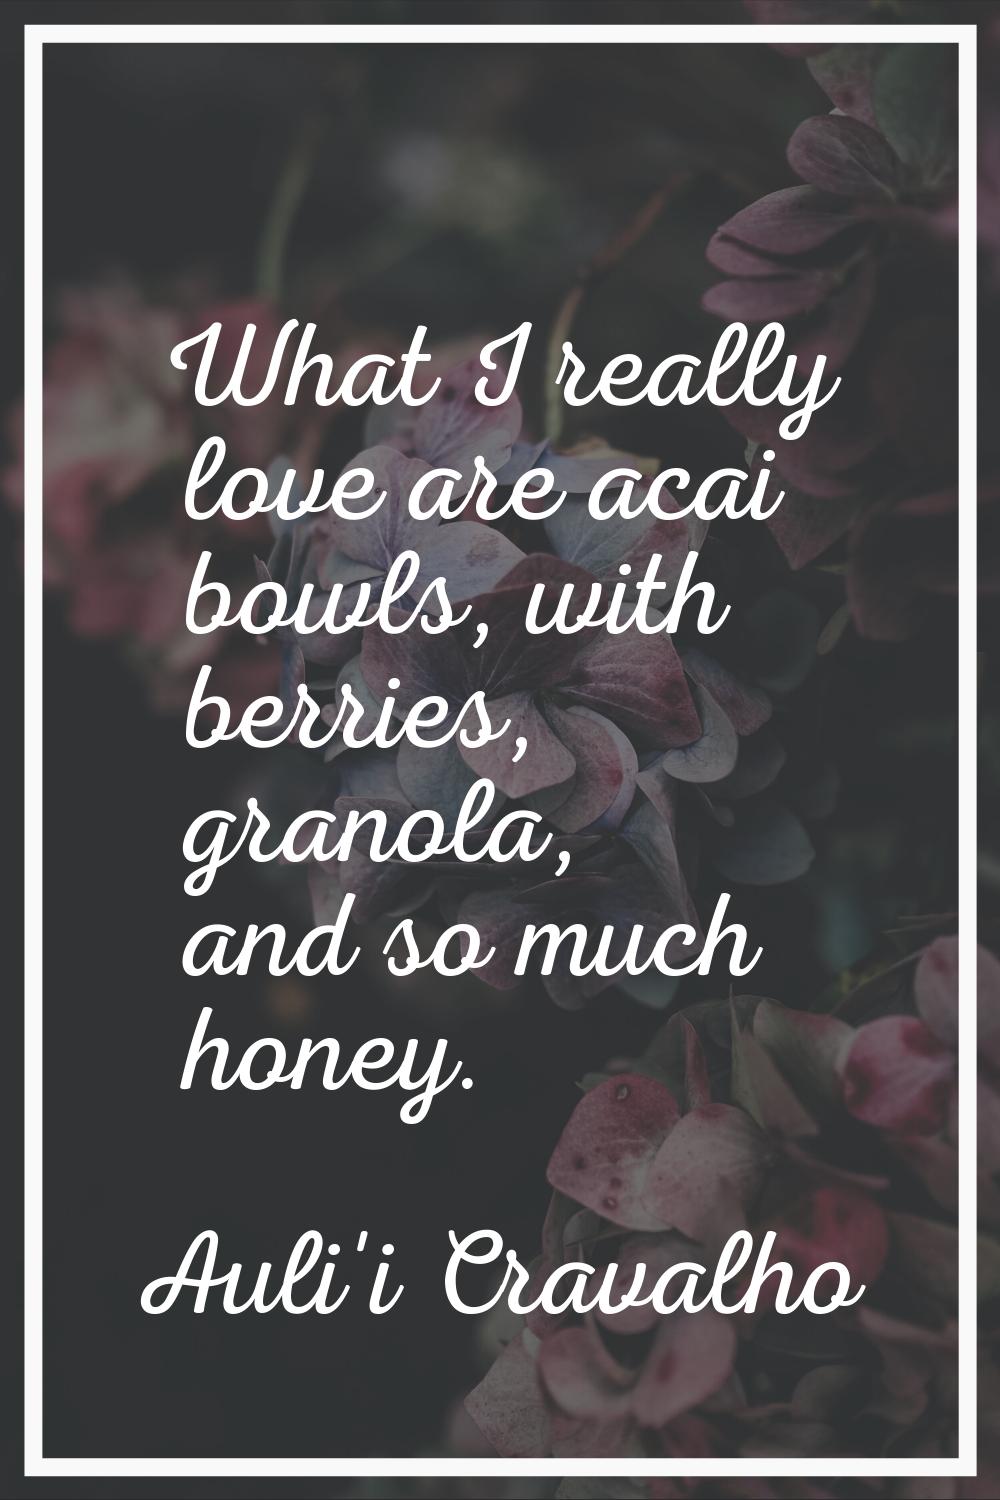 What I really love are acai bowls, with berries, granola, and so much honey.